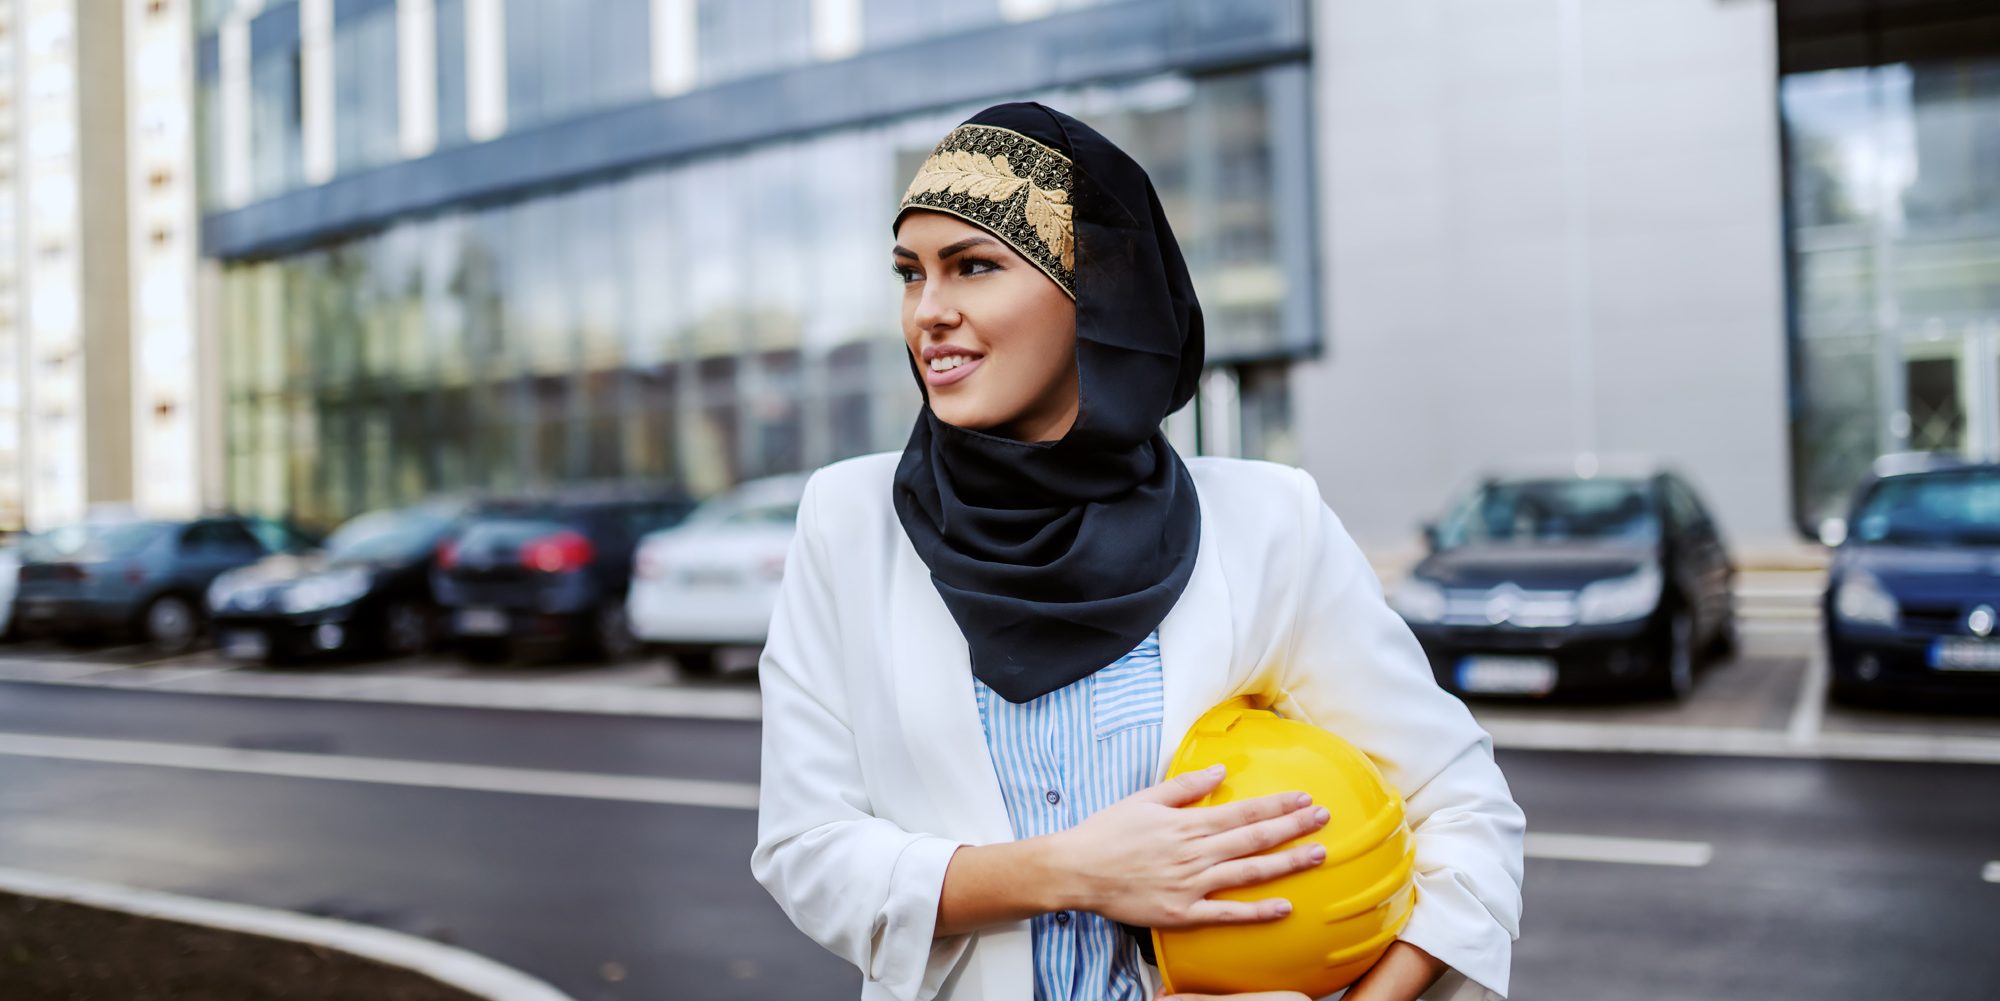 Arabic Young Woman With Hardhat Being Carried Aspect Ratio 1160 580